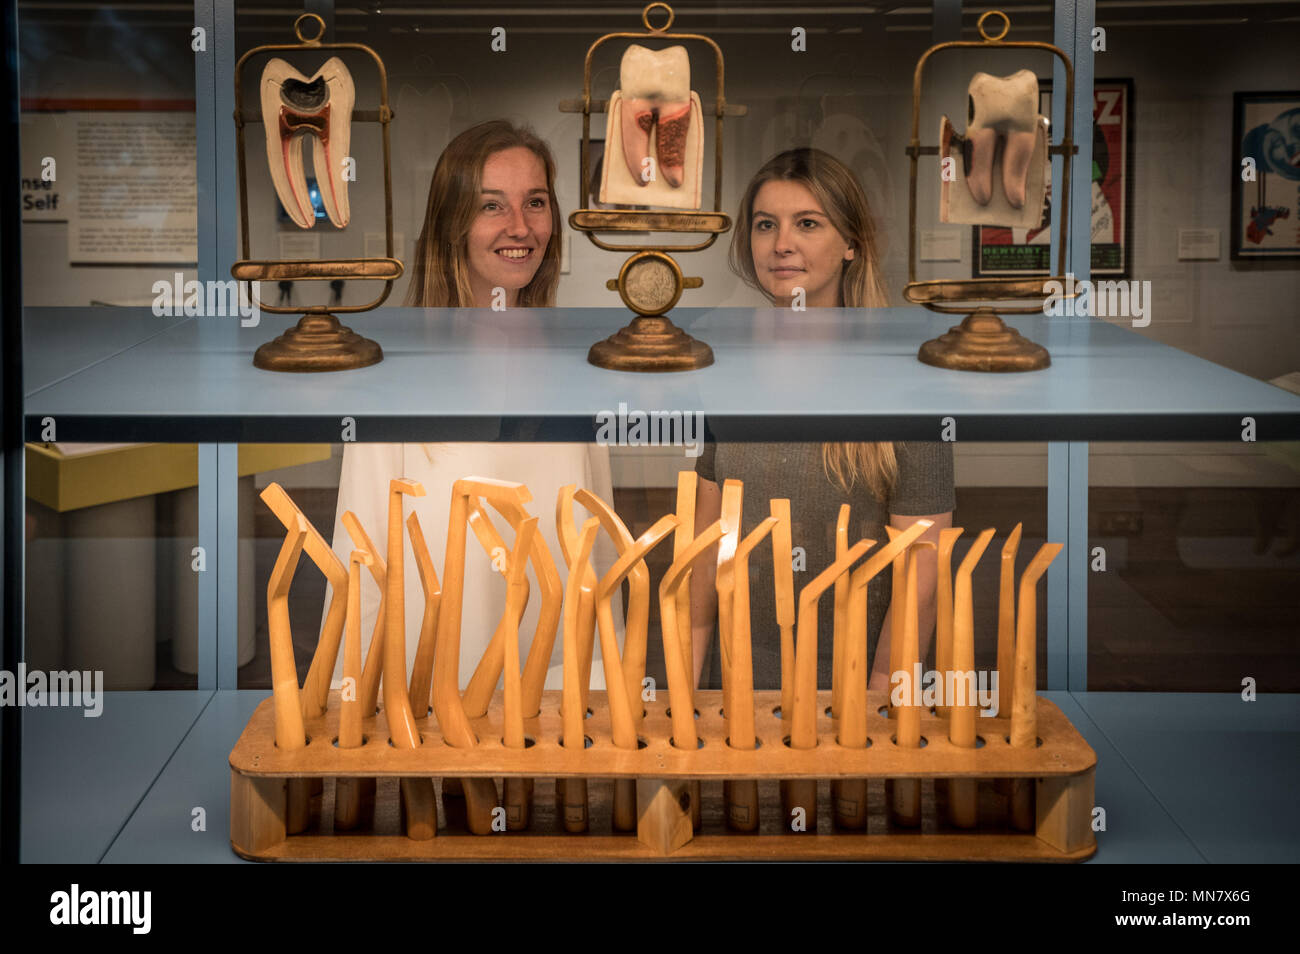 London, UK. 15th May, 2018. Exhibits from 'Teeth', a new exhibition at the Wellcome Collection in London, featuring over 150 objects and opening on May 17. Photo date: Tuesday, May 15, 2018. Credit: Roger Garfield/Alamy Live News Stock Photo